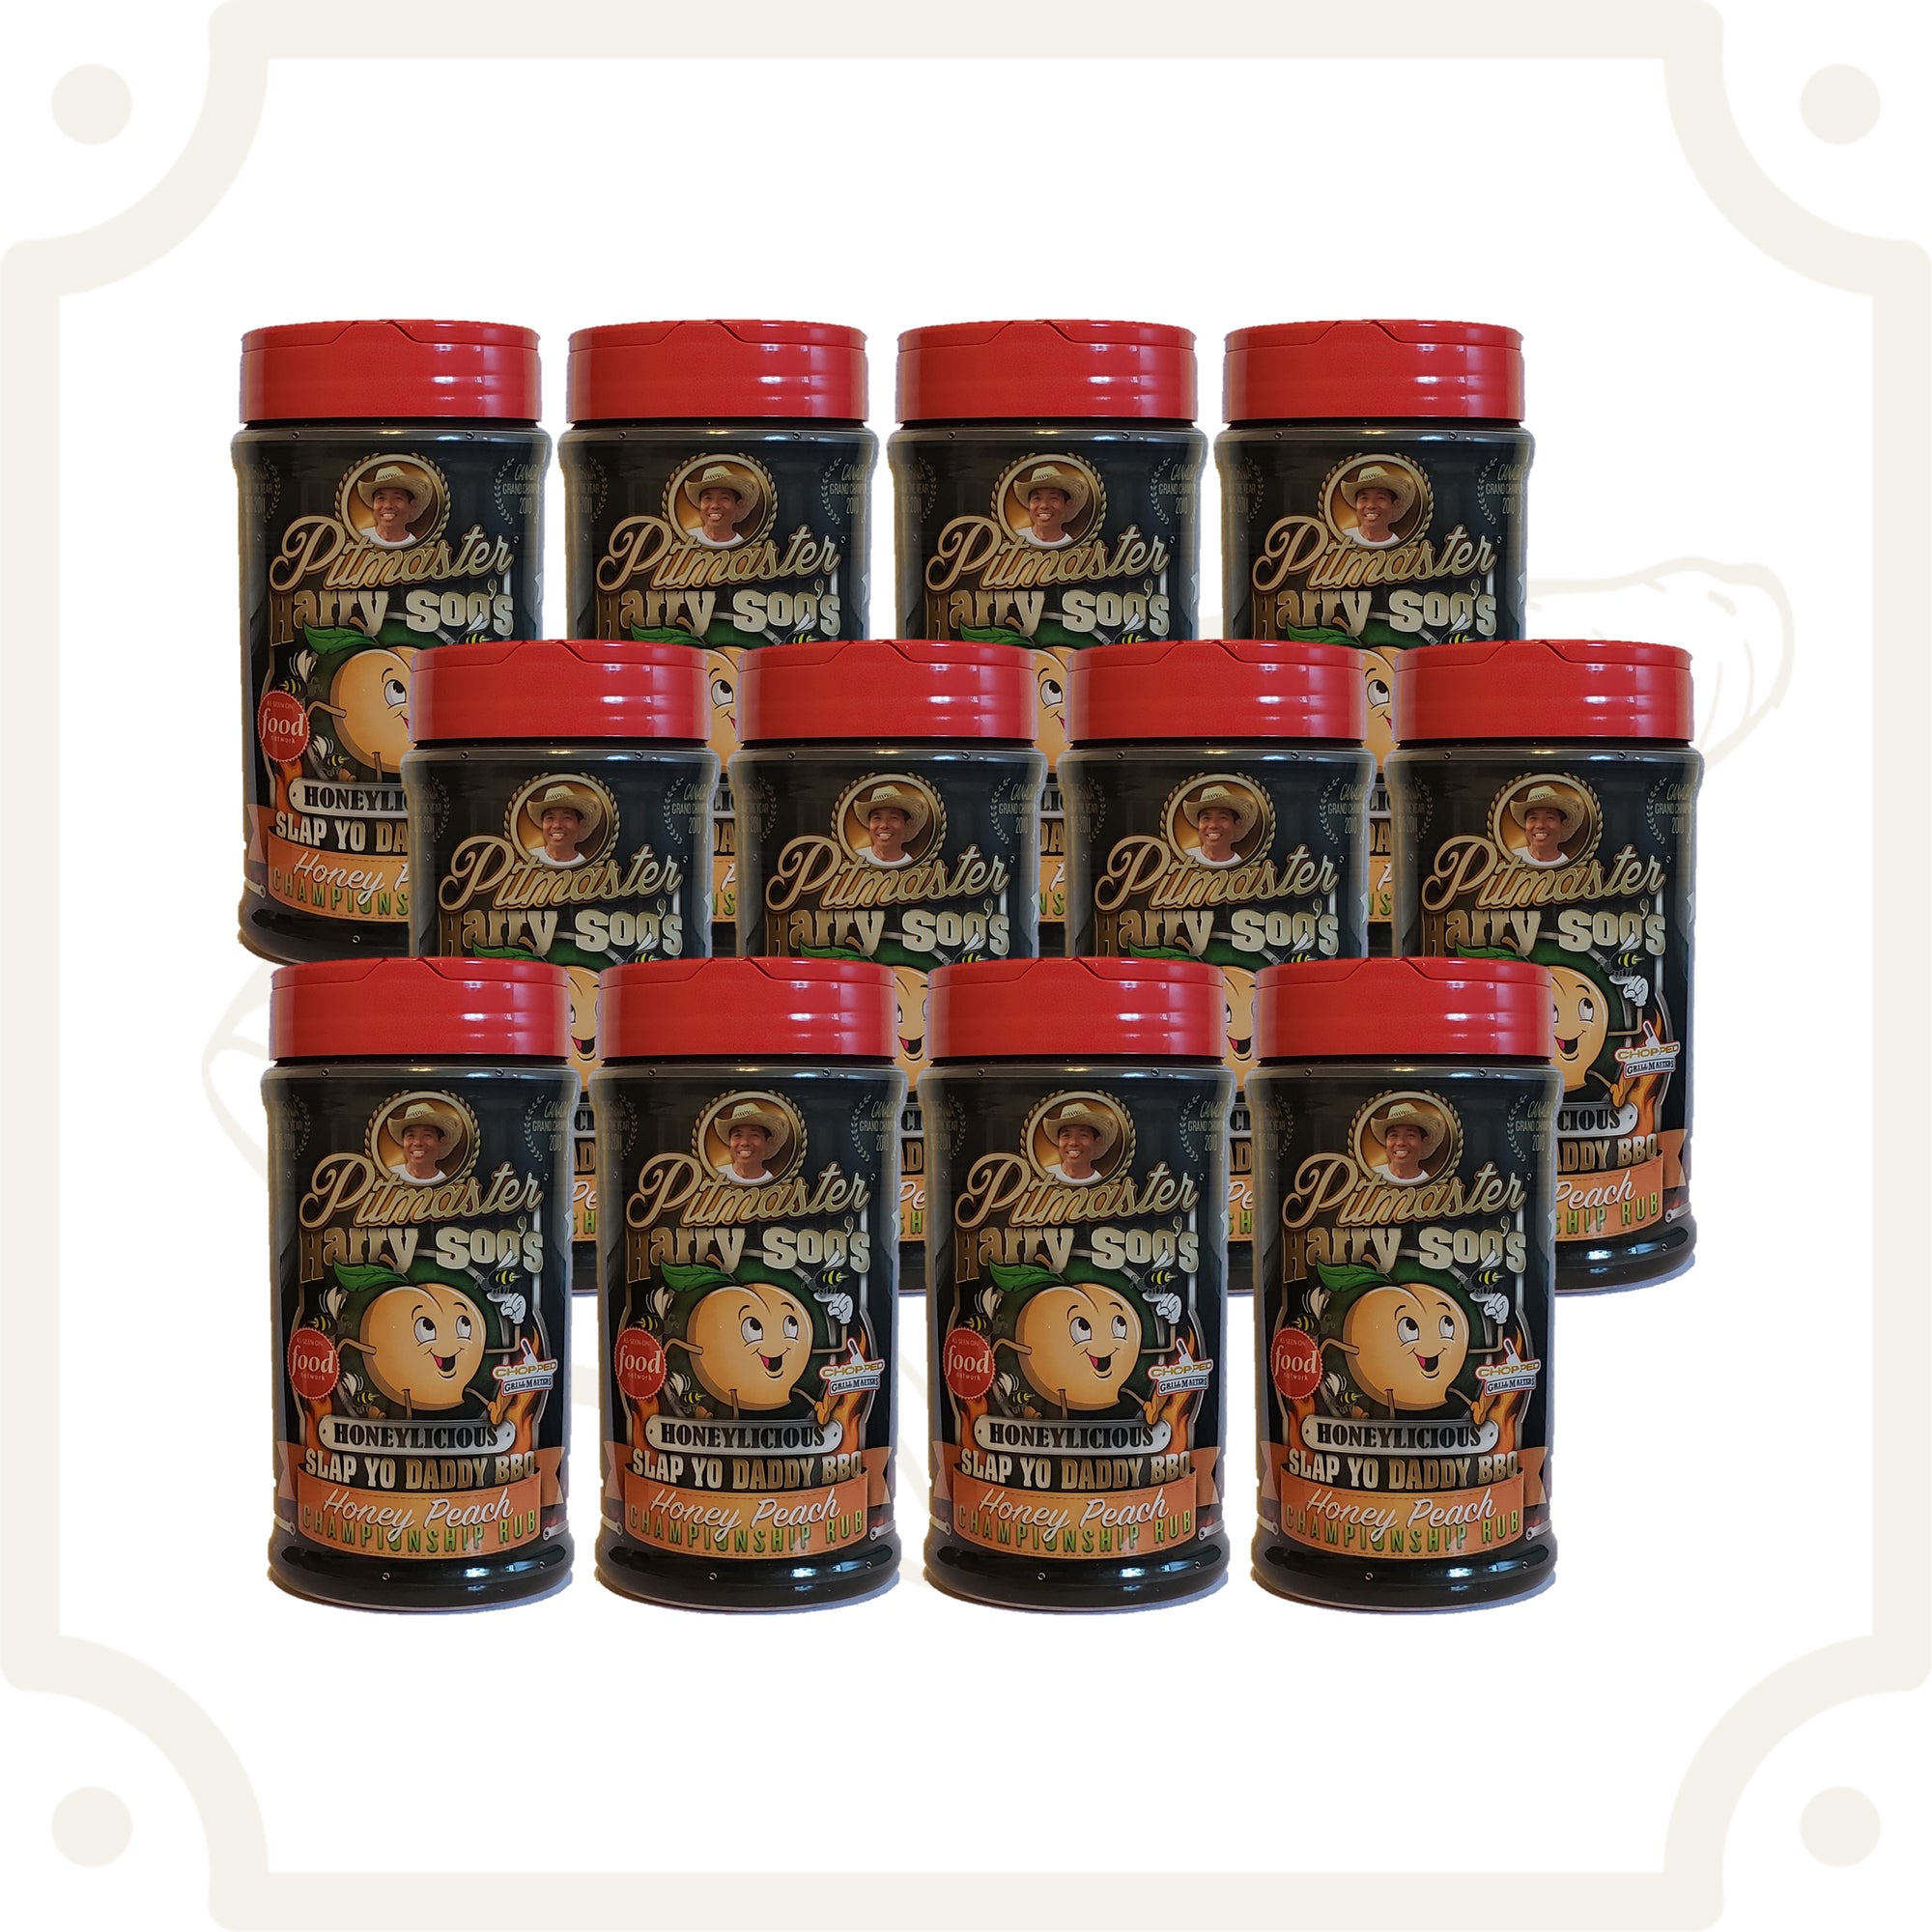 SYD Award Winning Rubs - 12 oz (Your Choice - 1 Case of 12 Pack)